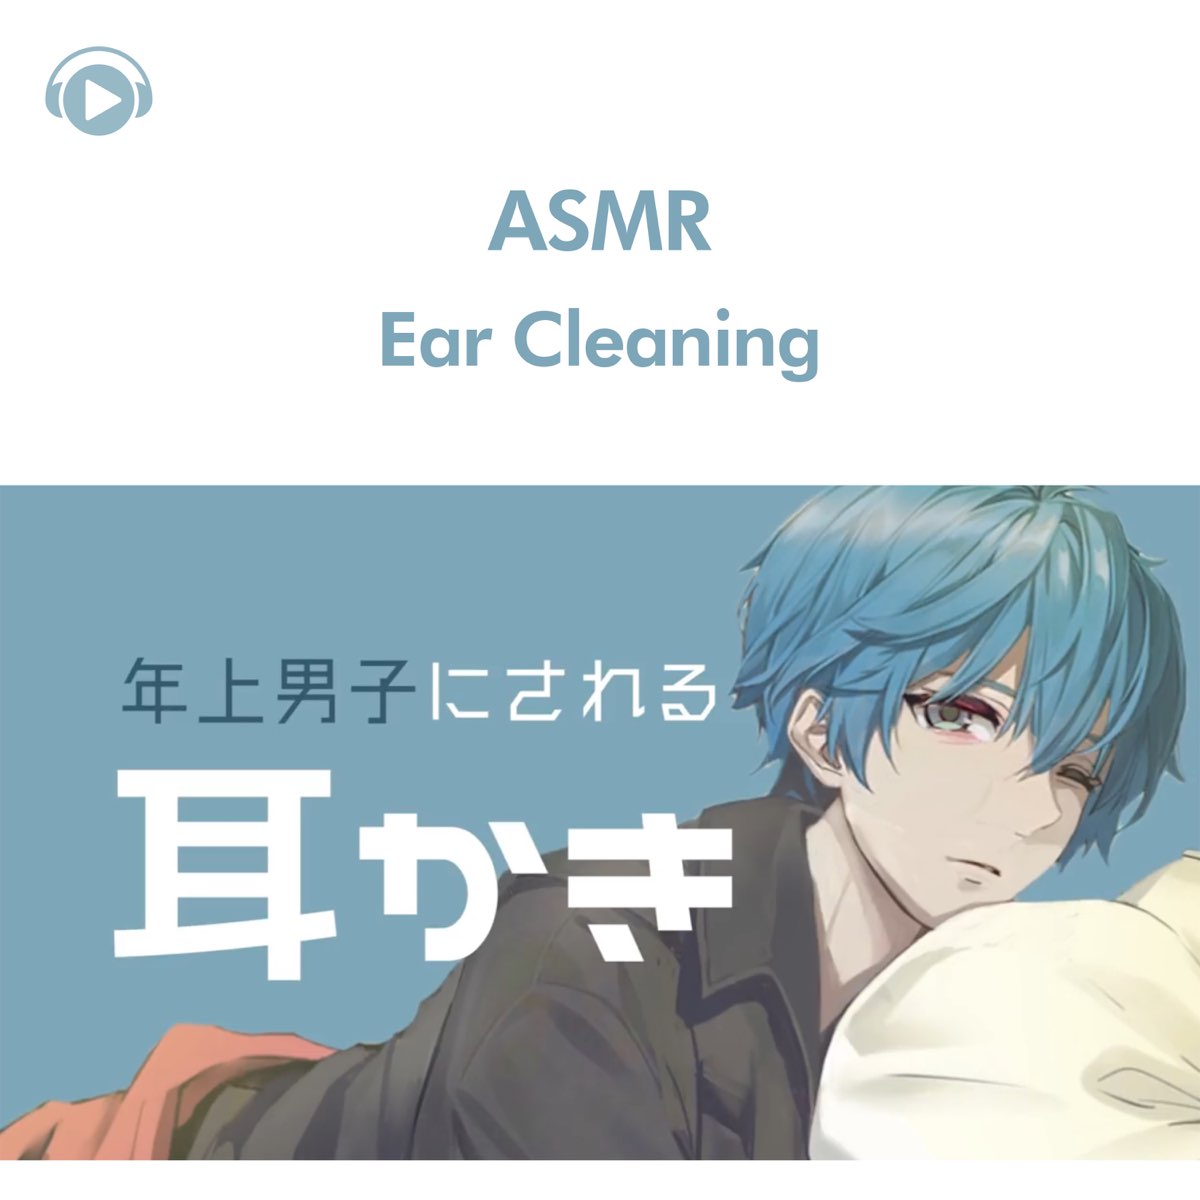 Asmr Ear Cleaning Voice Male Voice No 1 Feat Unoukun By Asmr By Abc All Bgm Channel On Apple Music